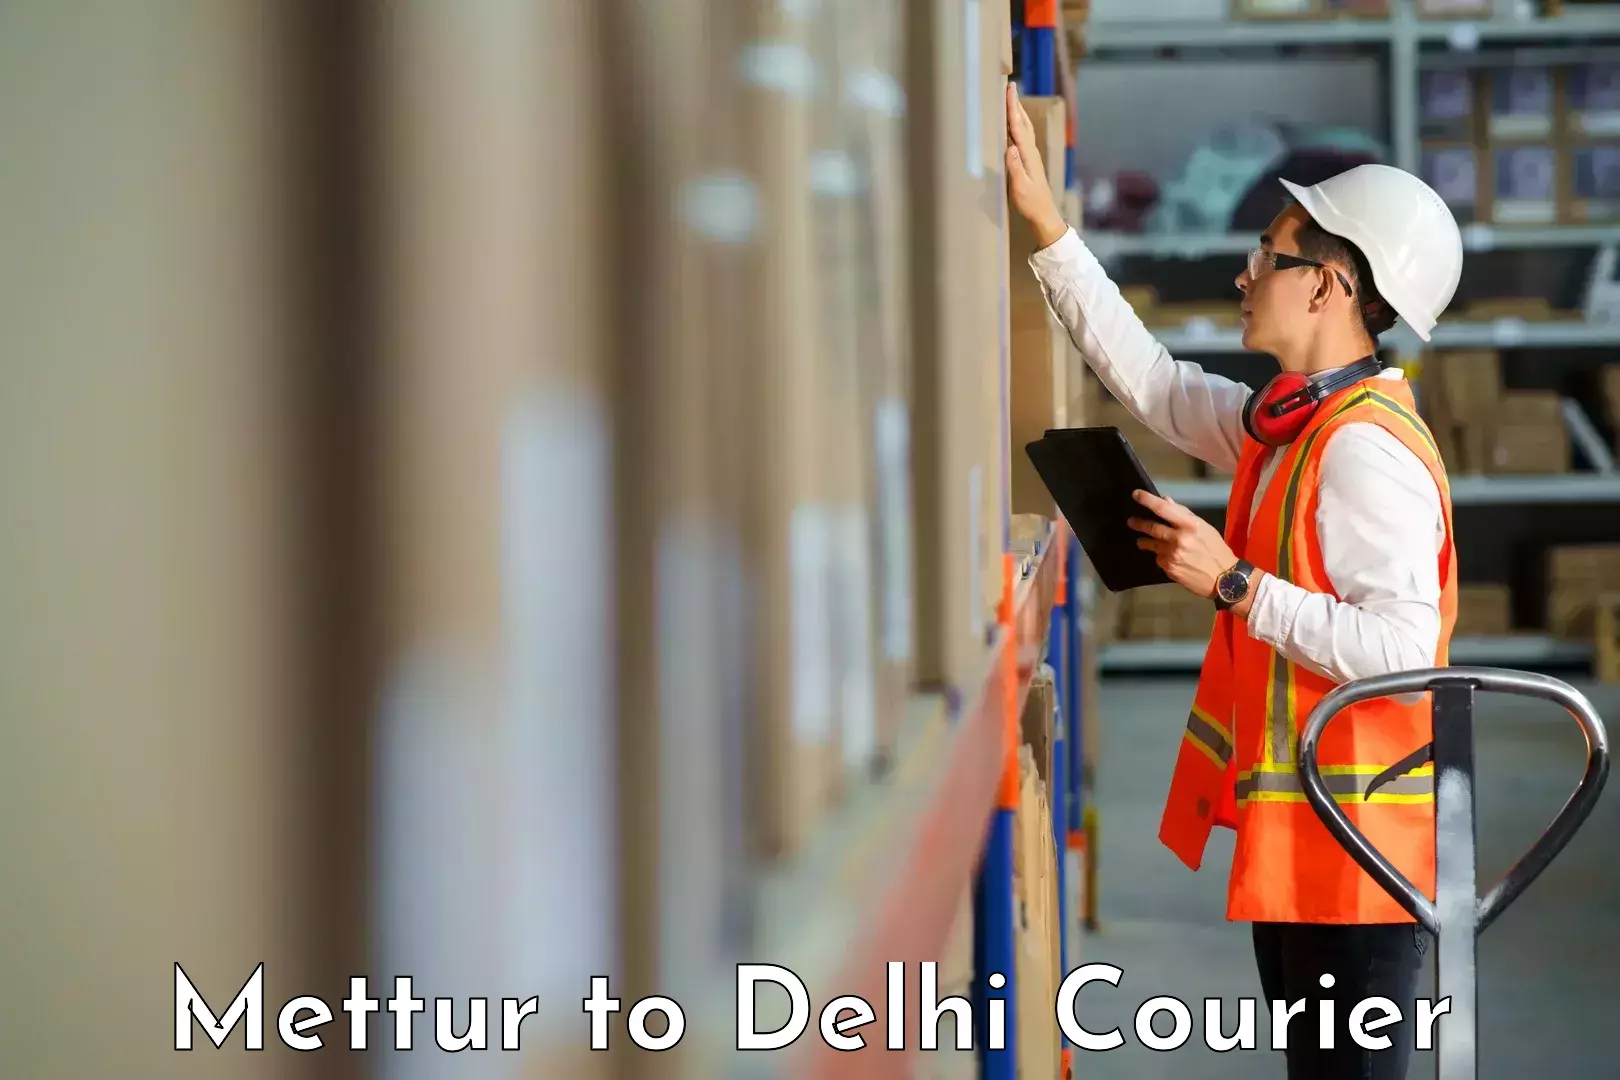 Full-service courier options Mettur to Delhi